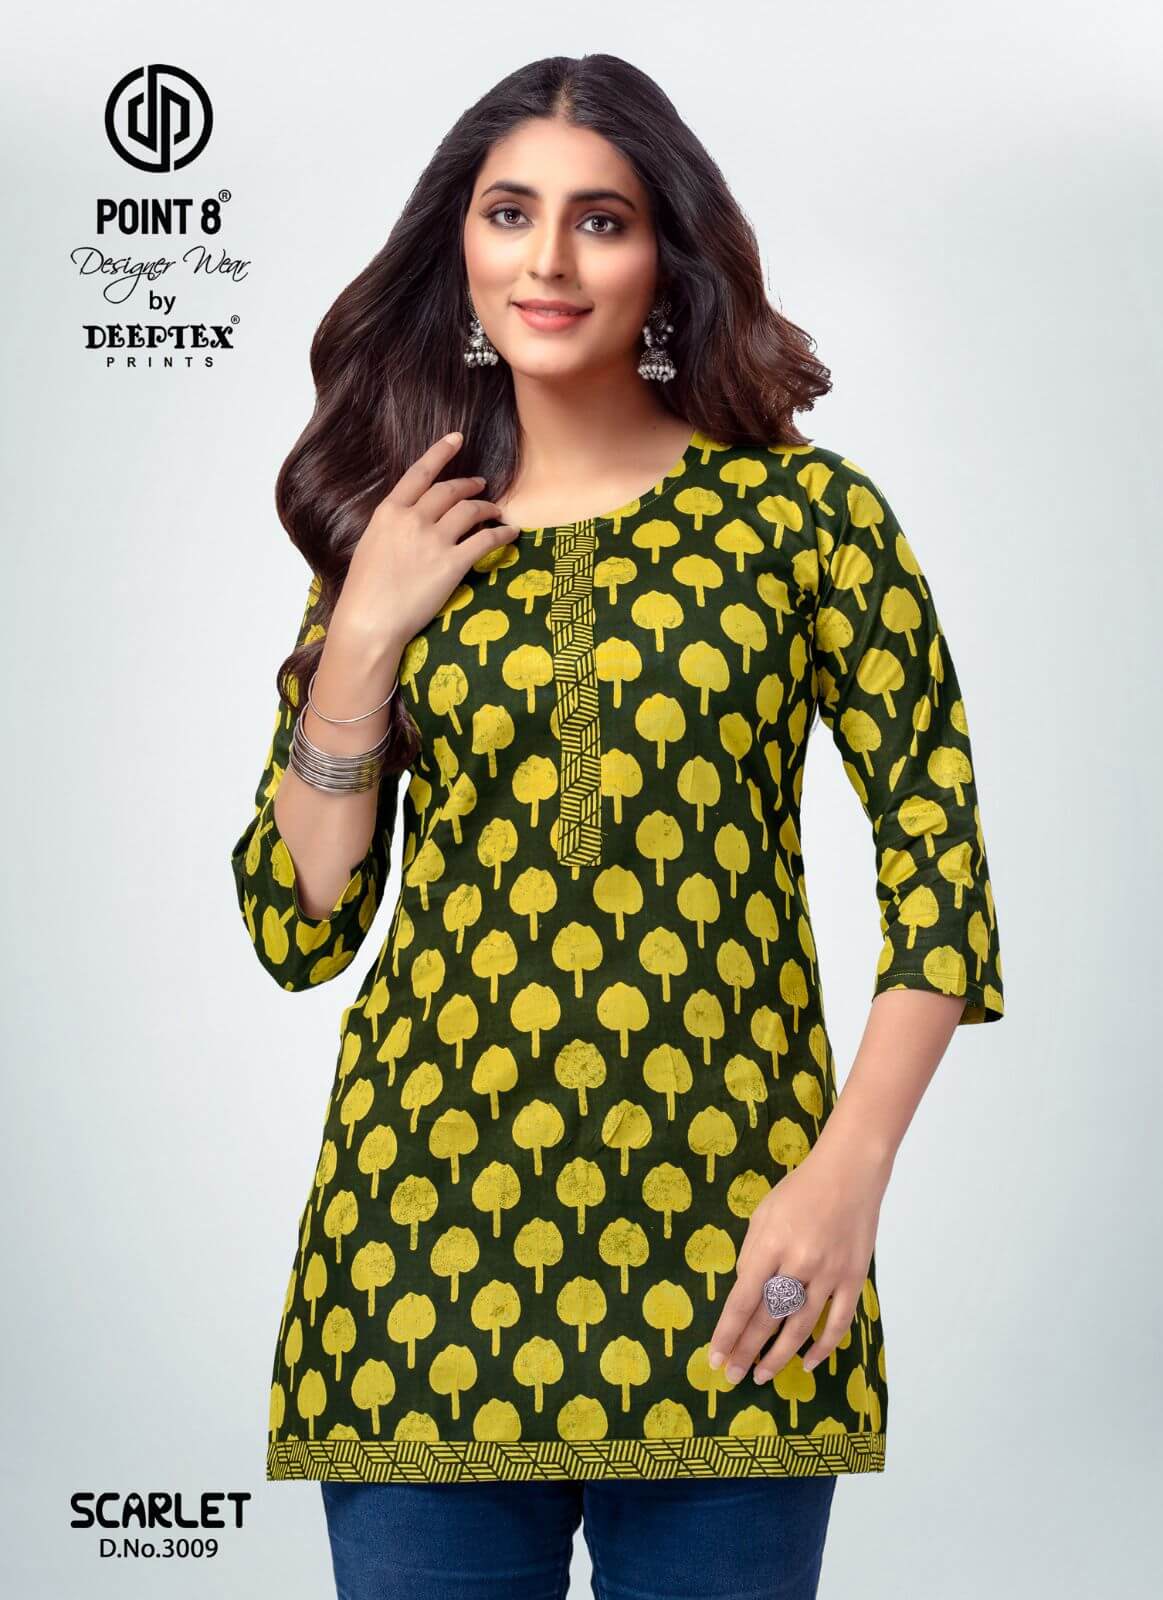 Deeptex Point 8 Scarlet Vol 3 Ladies Top Catalog collection 5